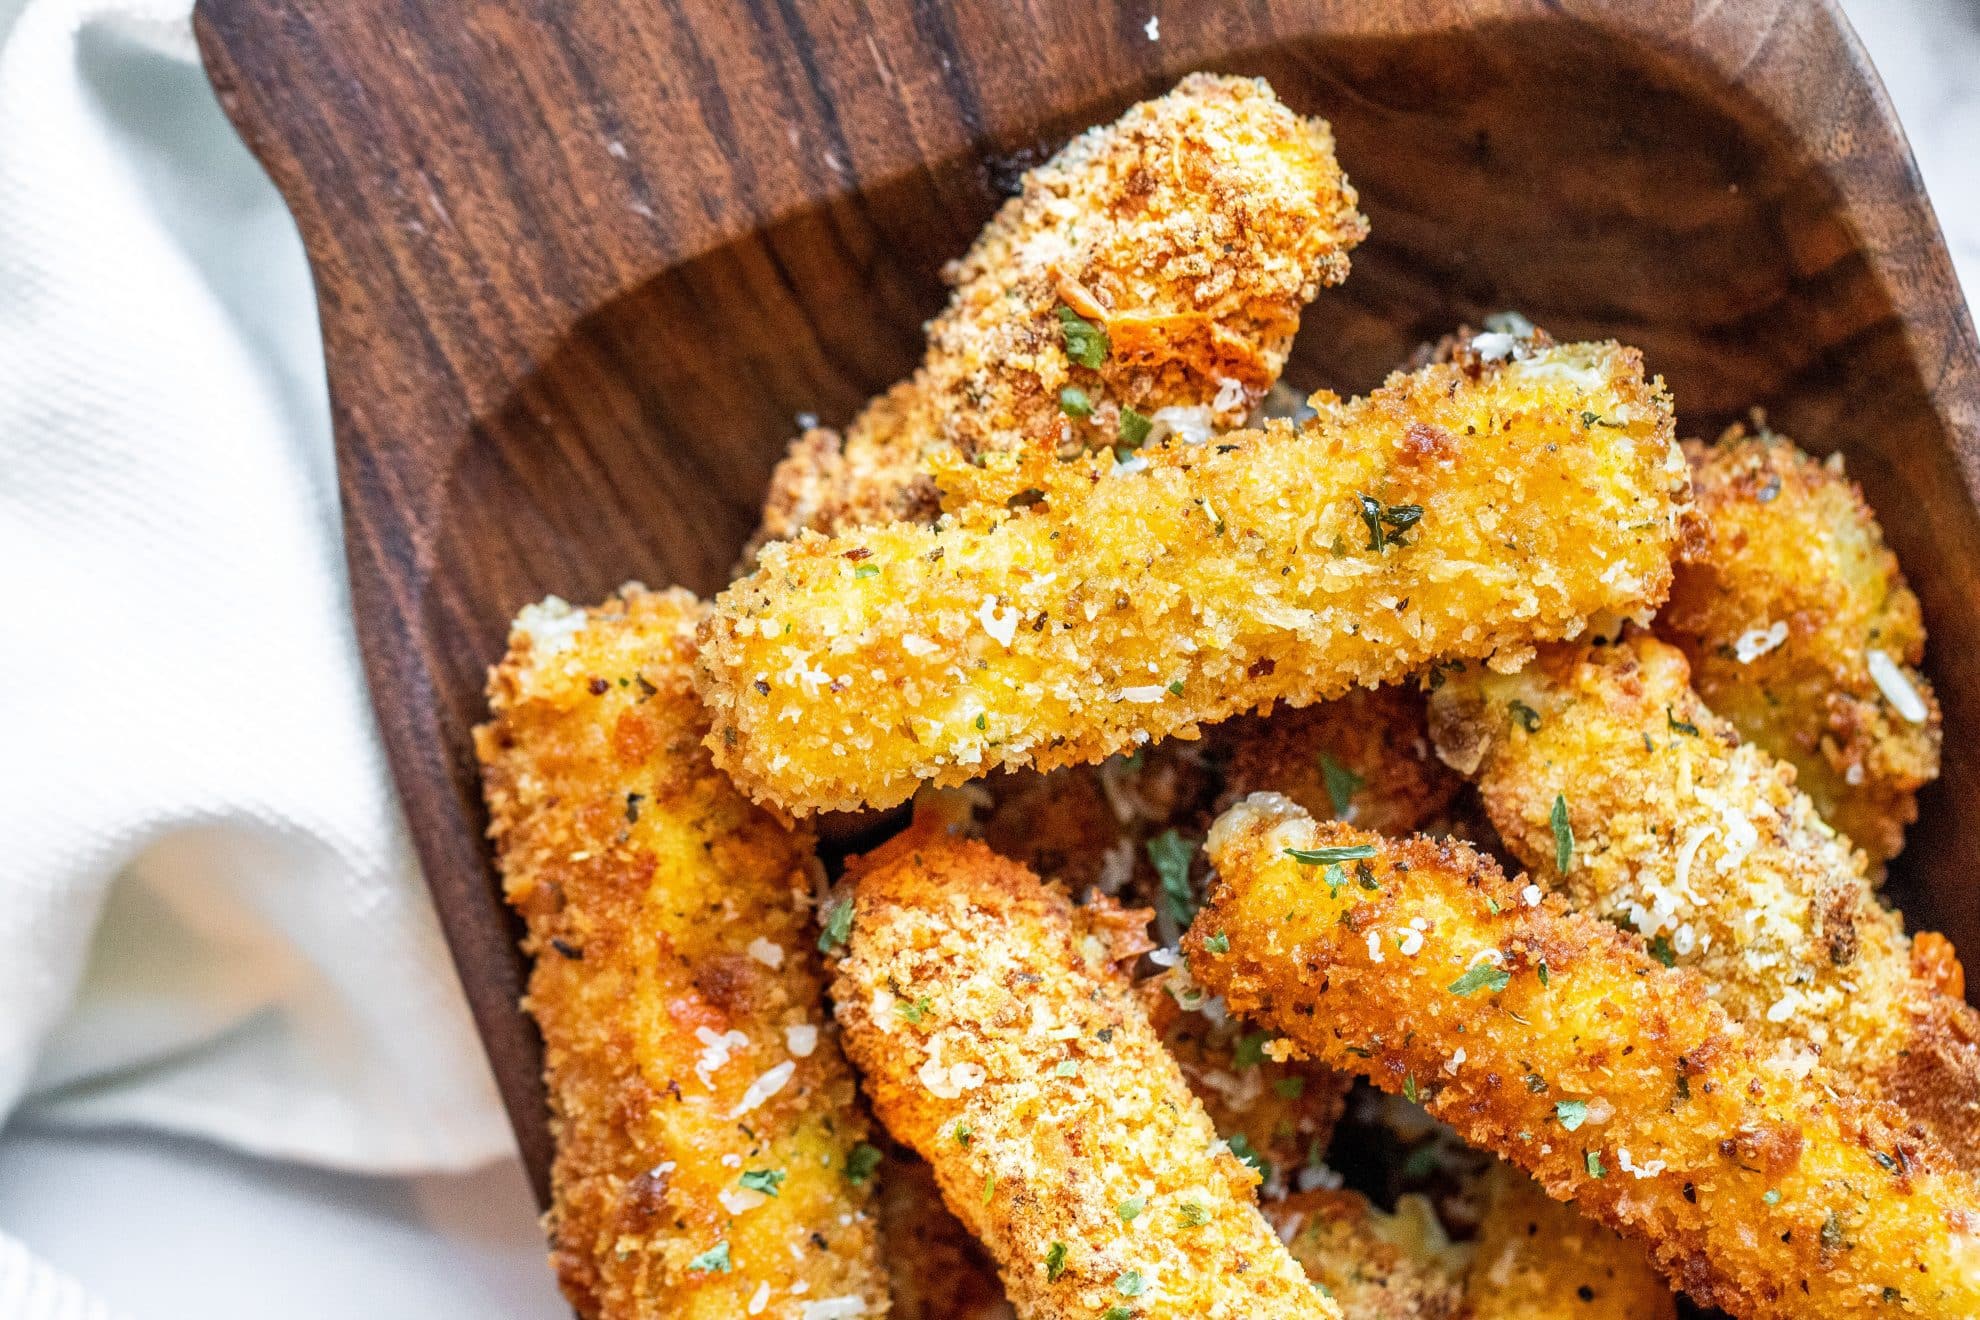 Our Cheesesticks are the perfect appetizer to share with family